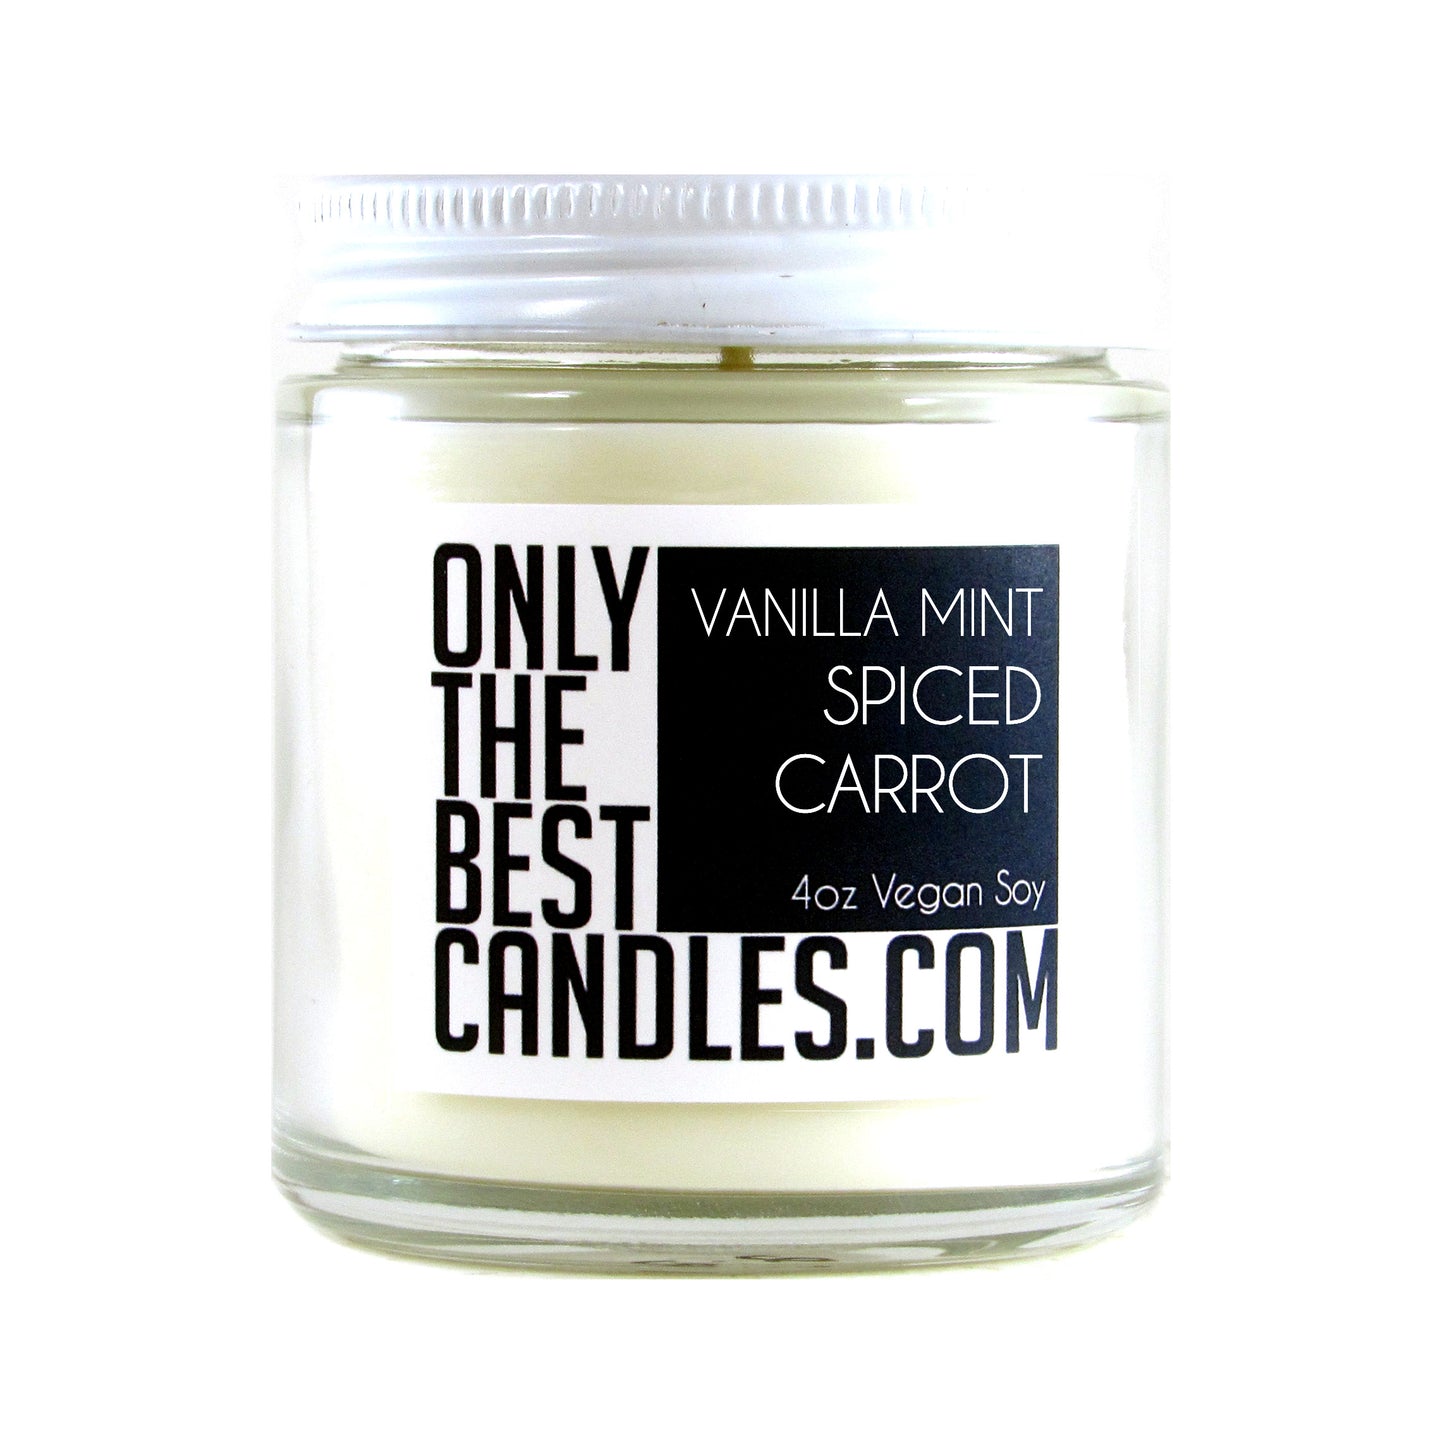 Vanilla Mint Spiced Carrot 4oz Candle